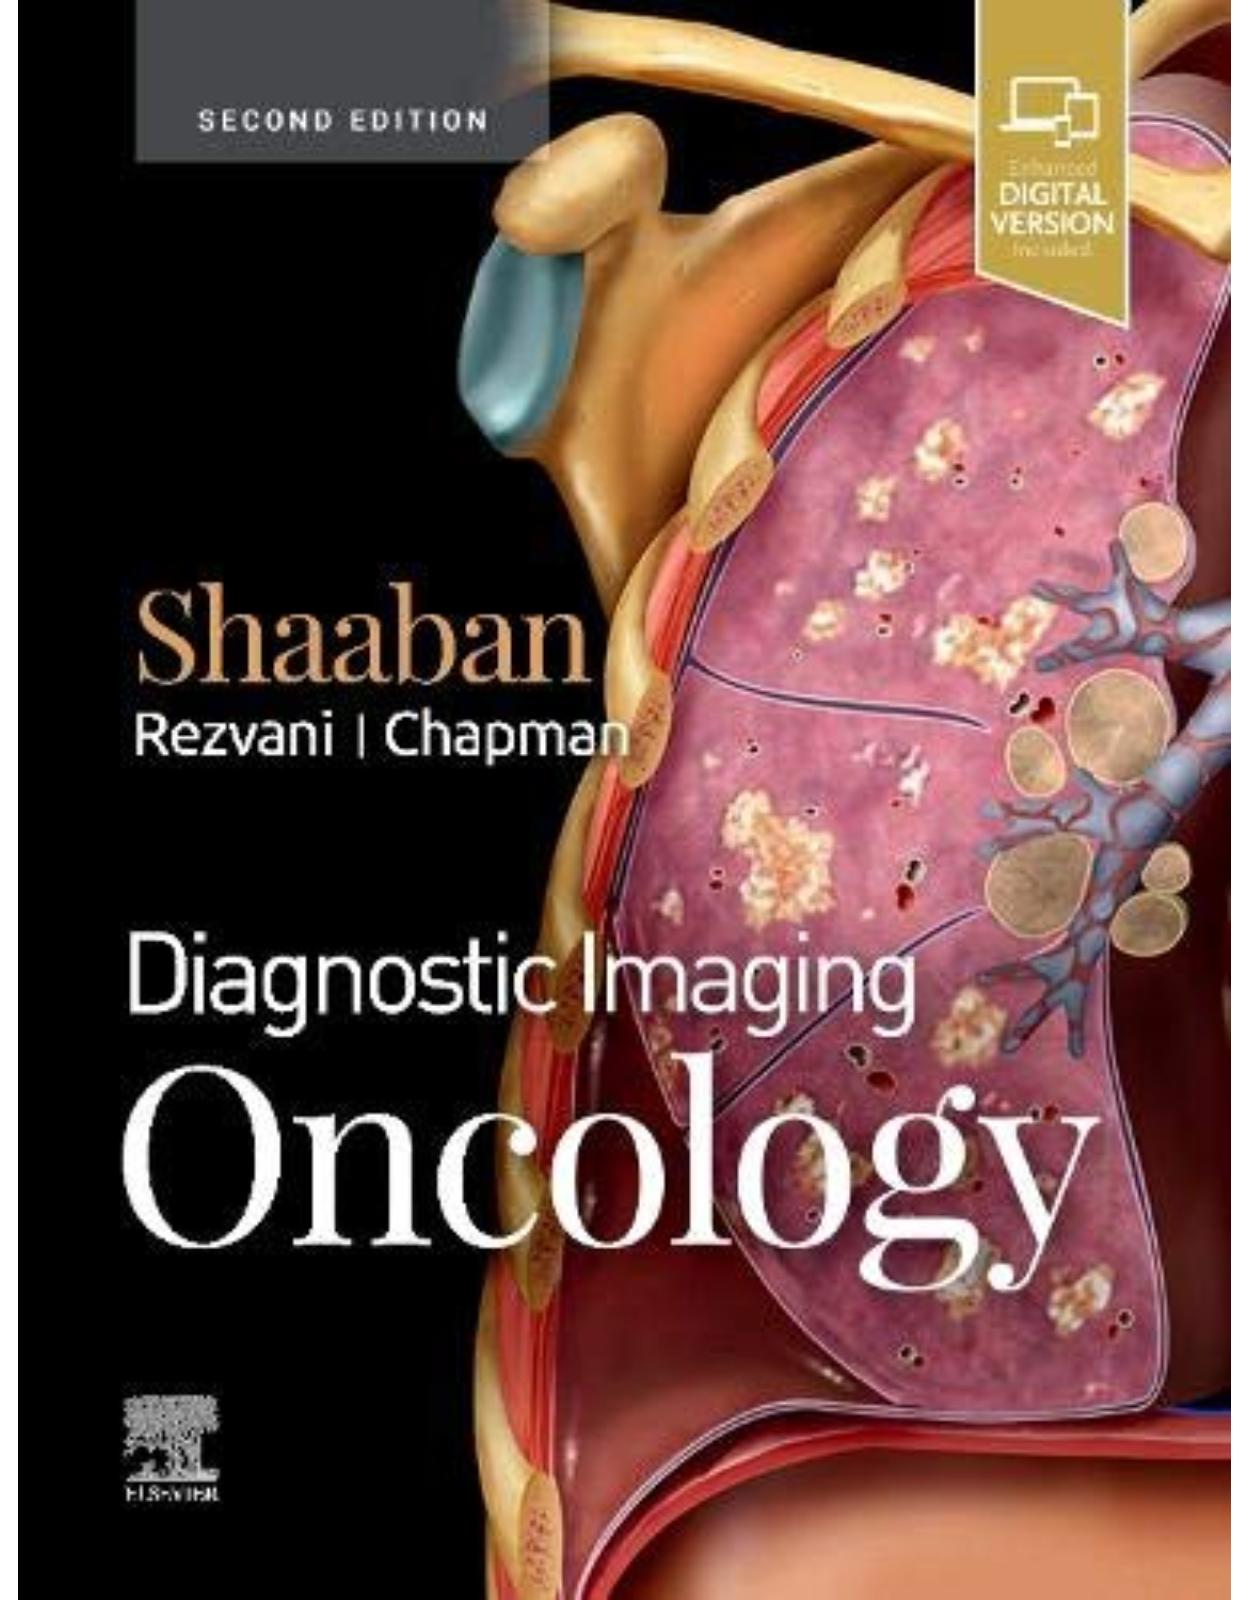 Diagnostic Imaging: Oncology, 2nd Edition